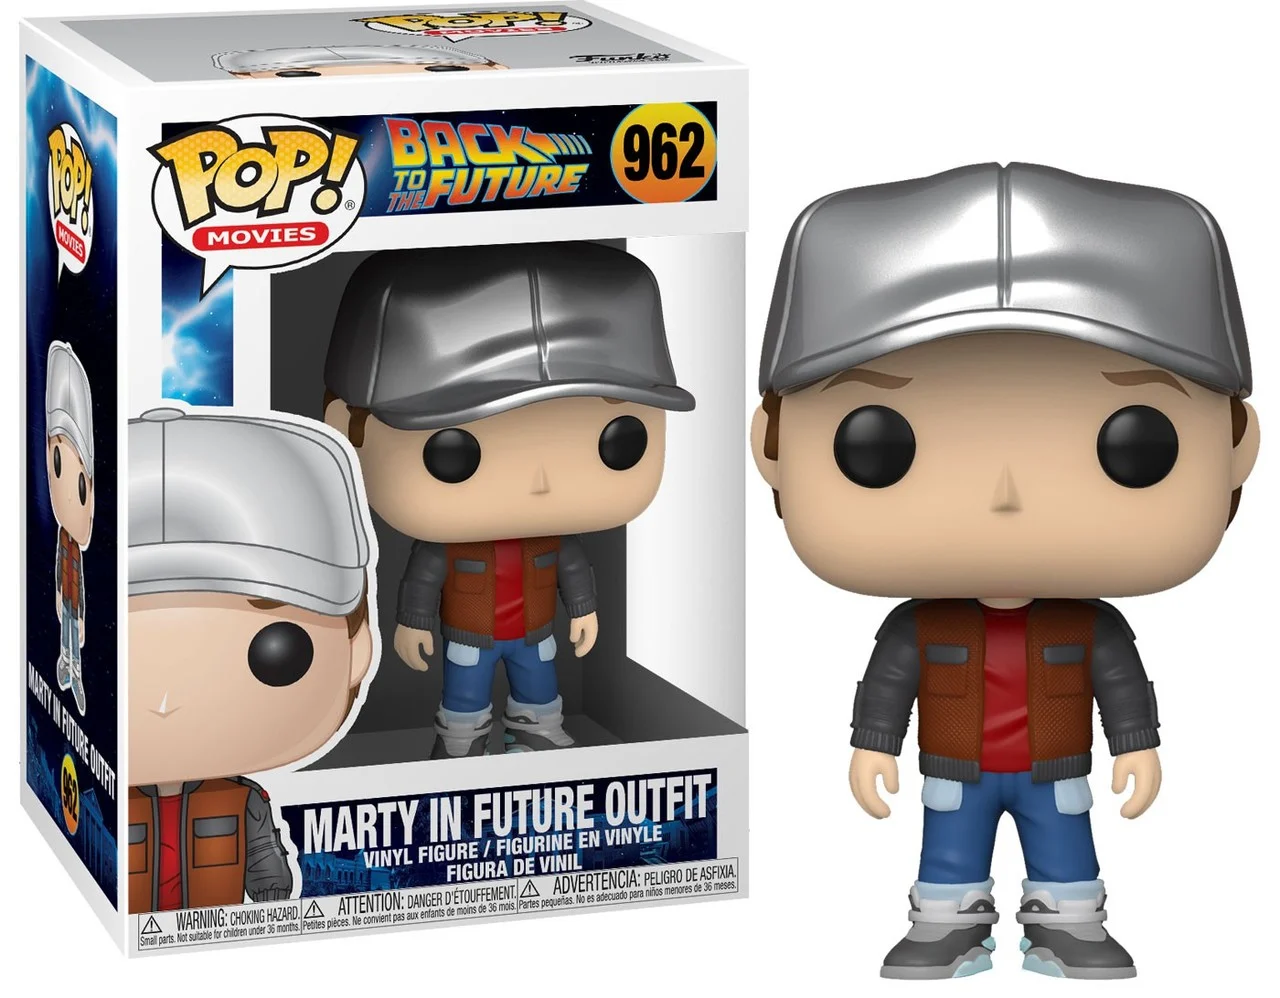 Funko Pop! Movies: Back To The Future - Marty in Future Oufit (962)